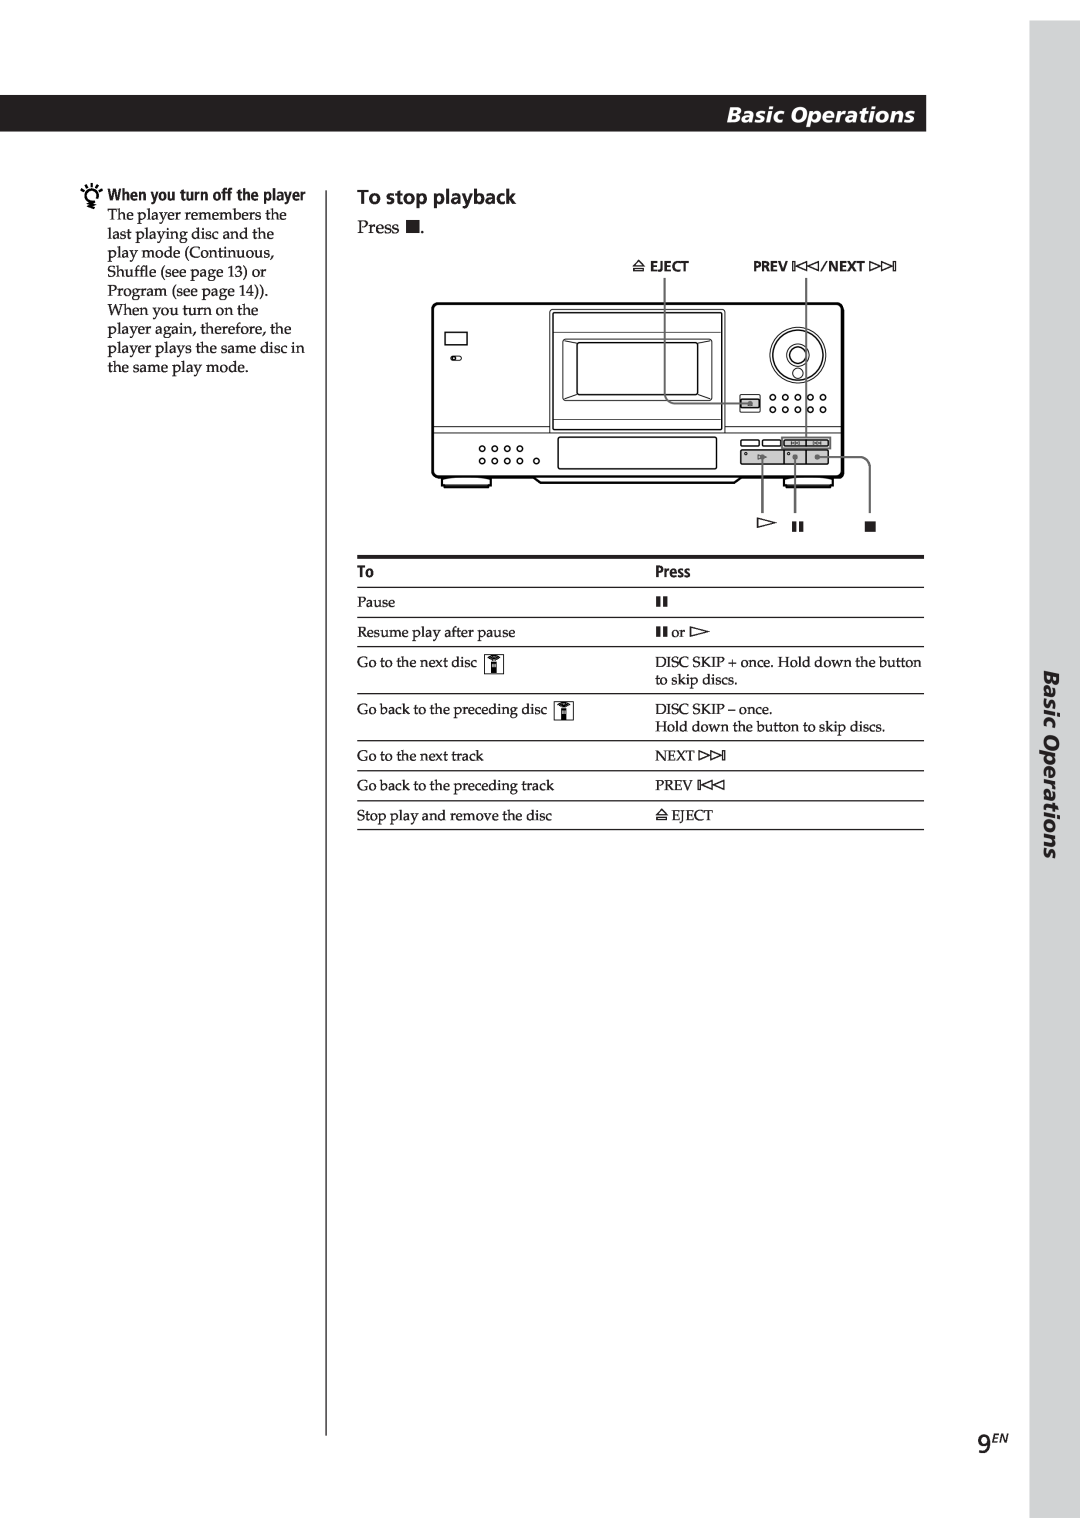 Sony CDP-CX153 manual Basic Operations, To stop playback, When you turn off the player, Press, ¤ Eject Prev -/Next ± 